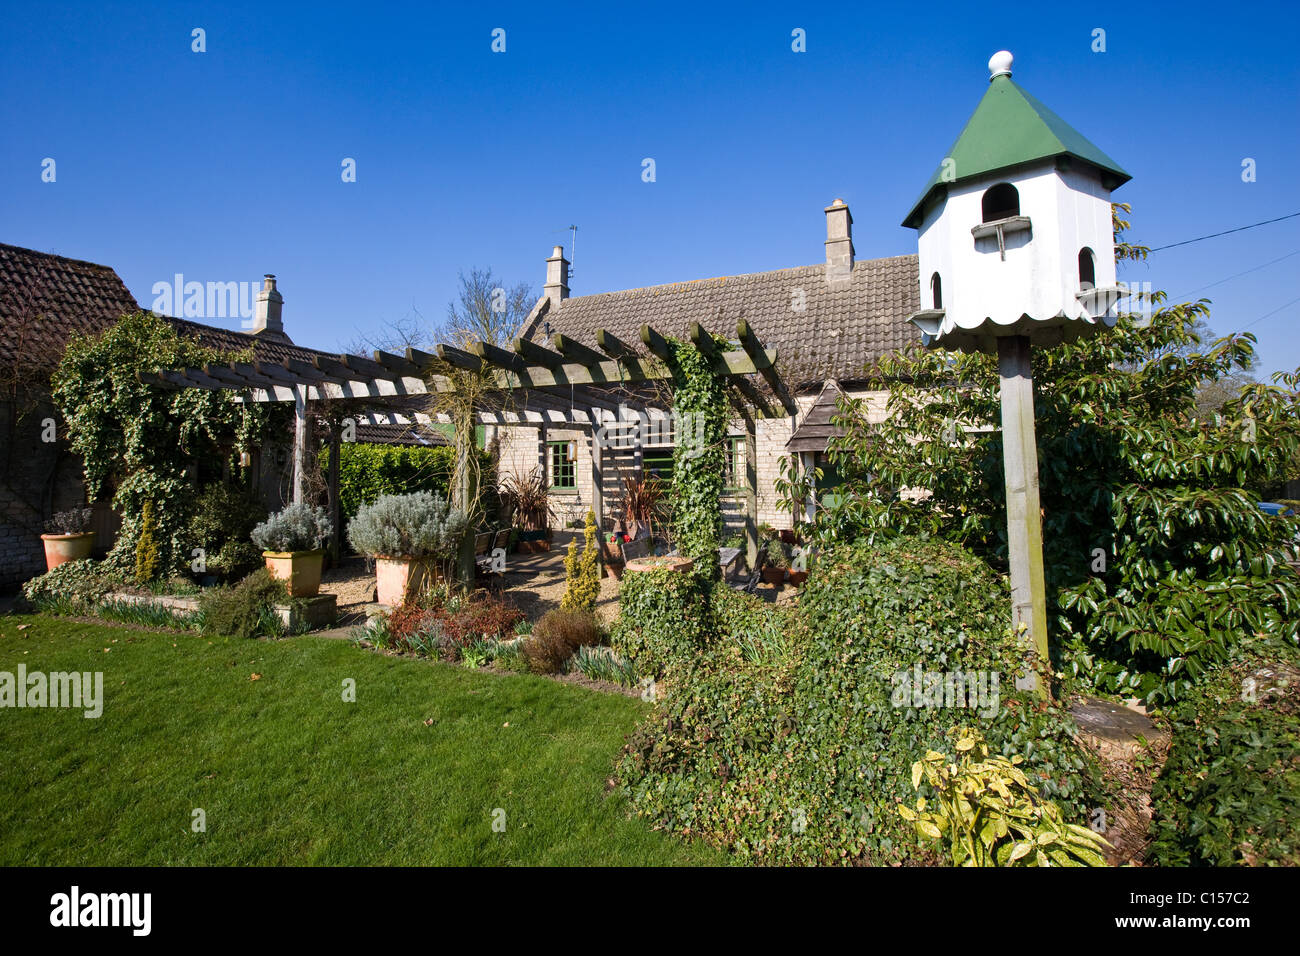 Michelin Star Rated Pub,The Olive Branch, Clipsham,Rutland,England Stock  Photo - Alamy